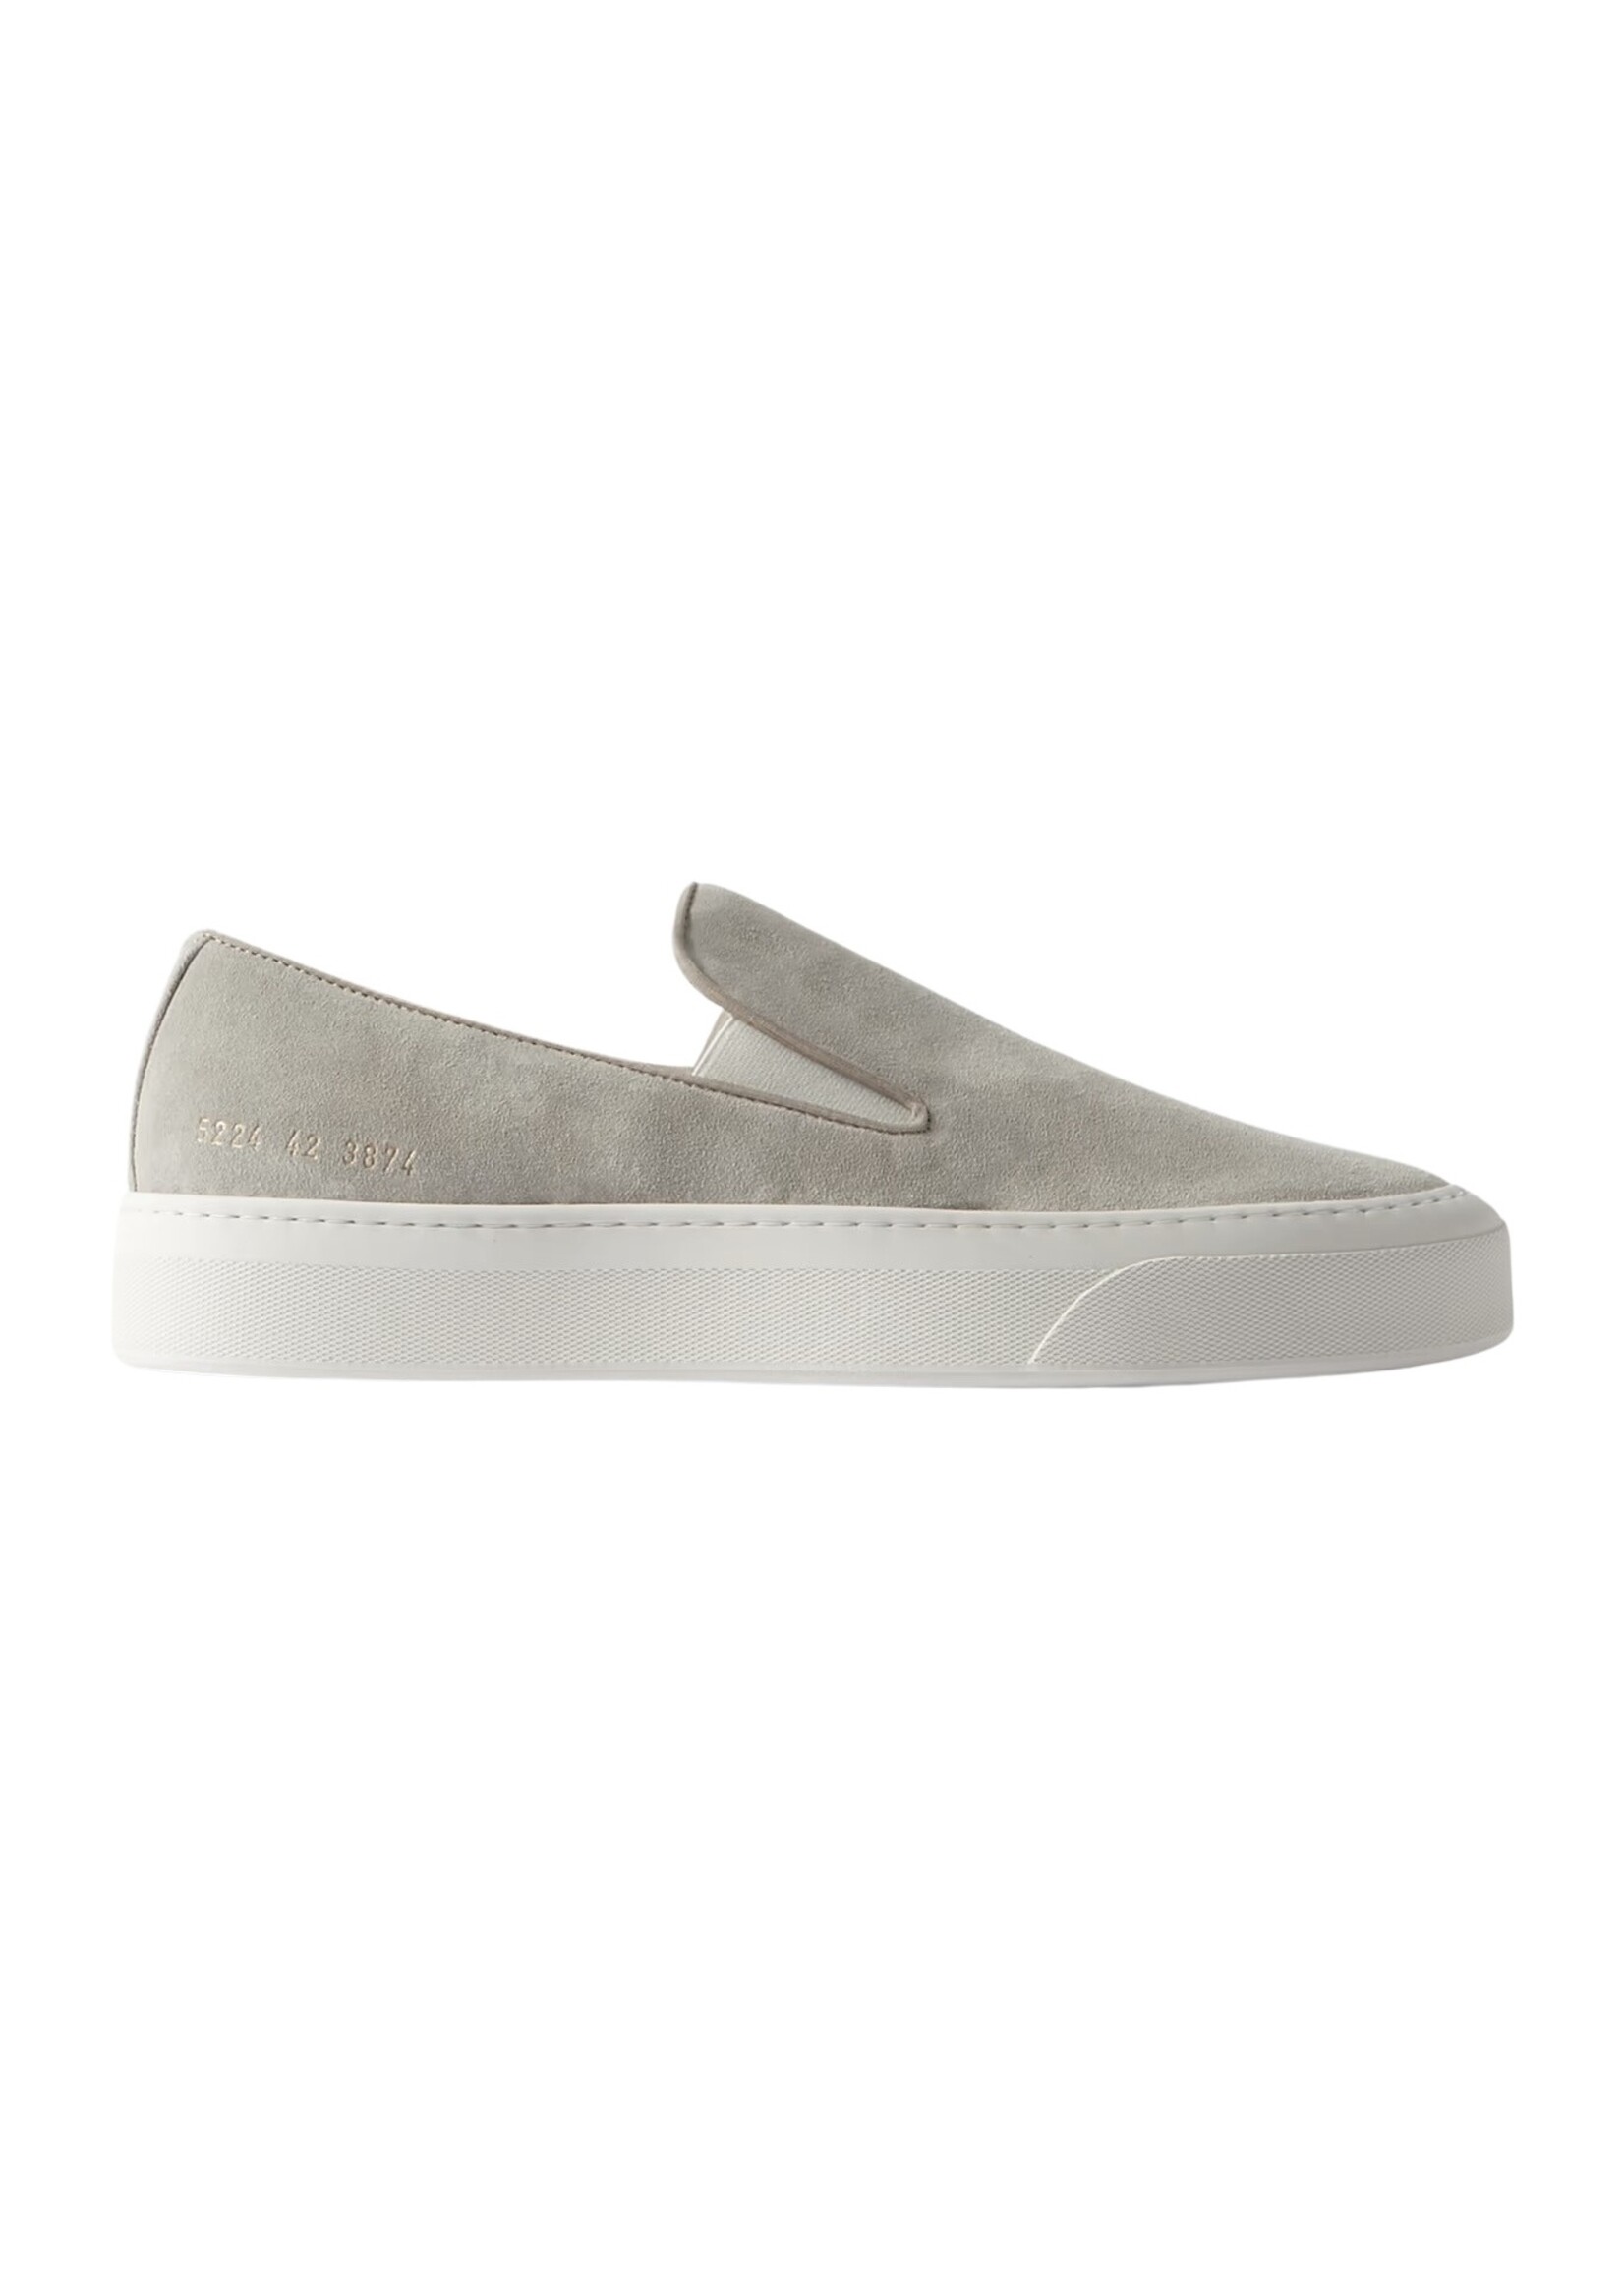 COMMON PROJECTS SLIP ON SUEDE SNEAKER